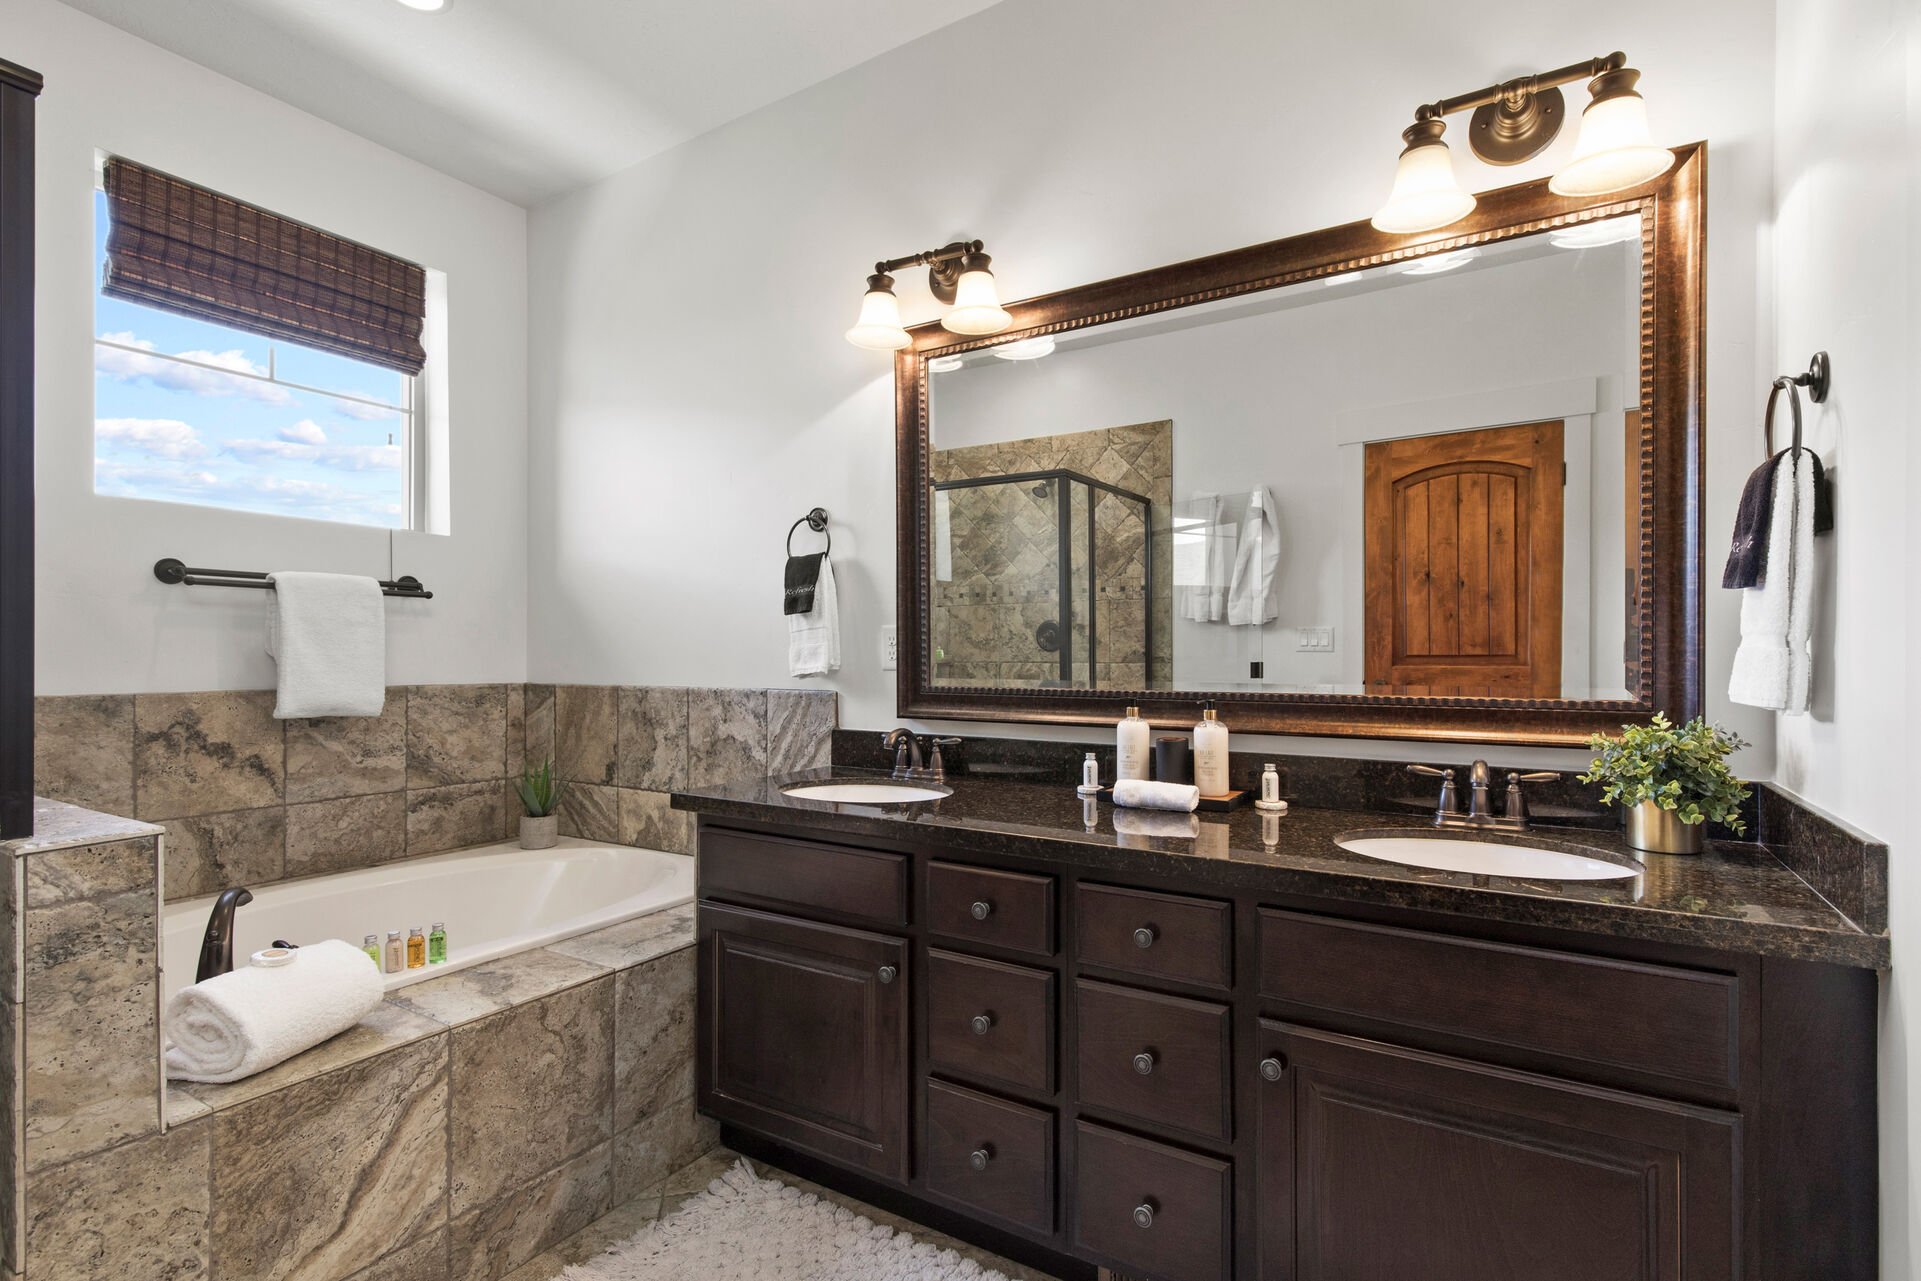 Master Bathroom with double sinks, tub, and shower